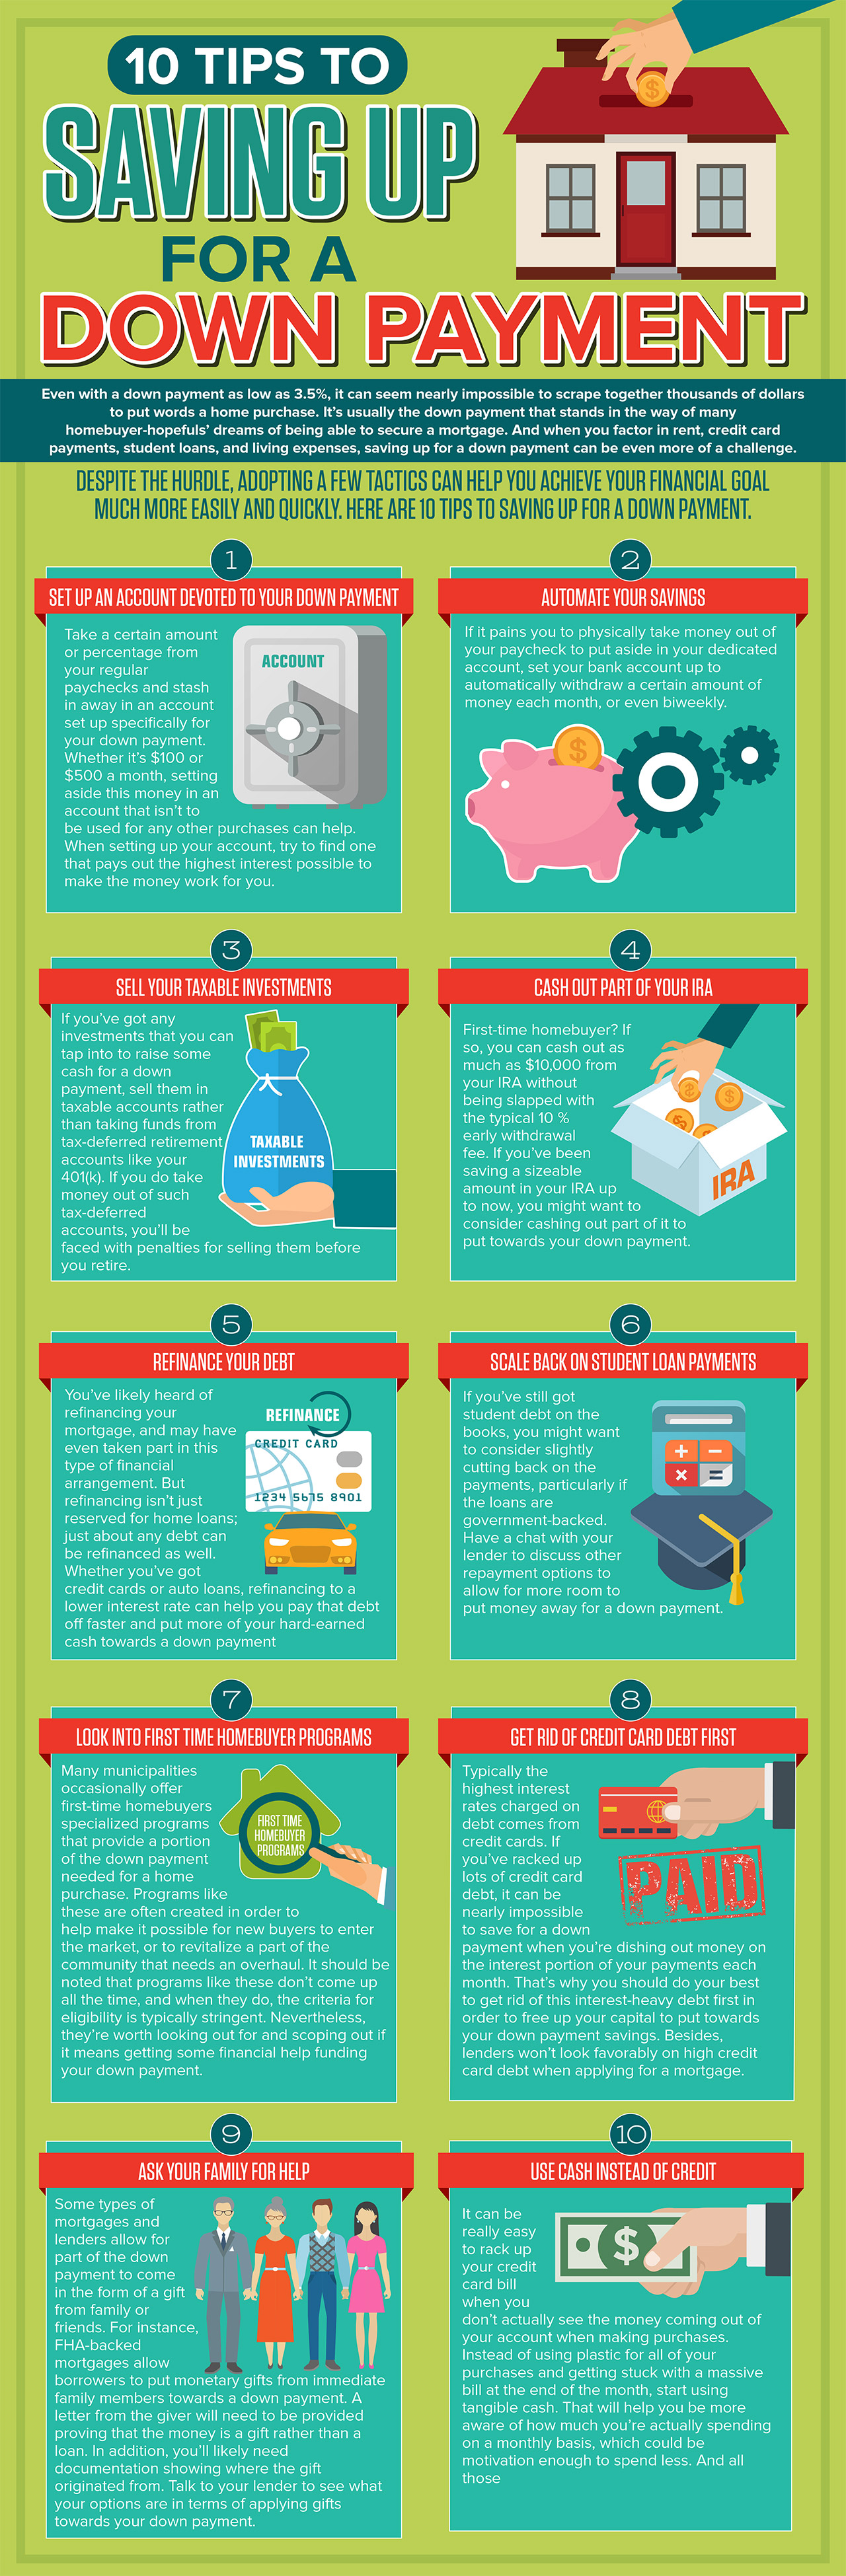 INFOGRAPHIC 10 Tips to Saving Up For a Down Payment Sandy Petermann